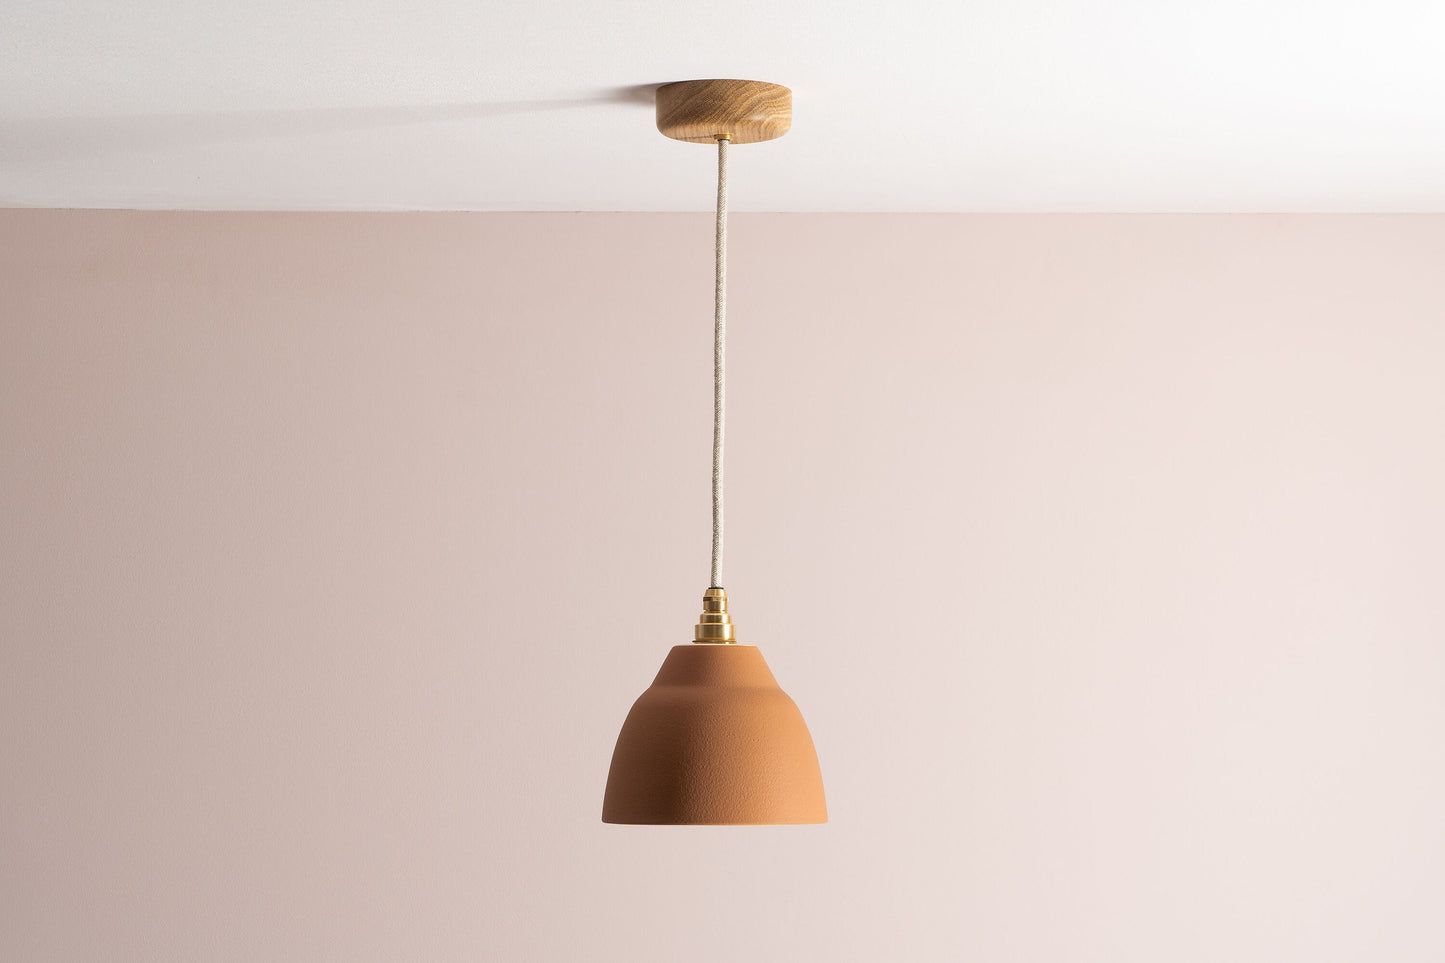 Small Terracotta Element Pendant Light in Ceramic and Brass/Nickel by StudioHaran